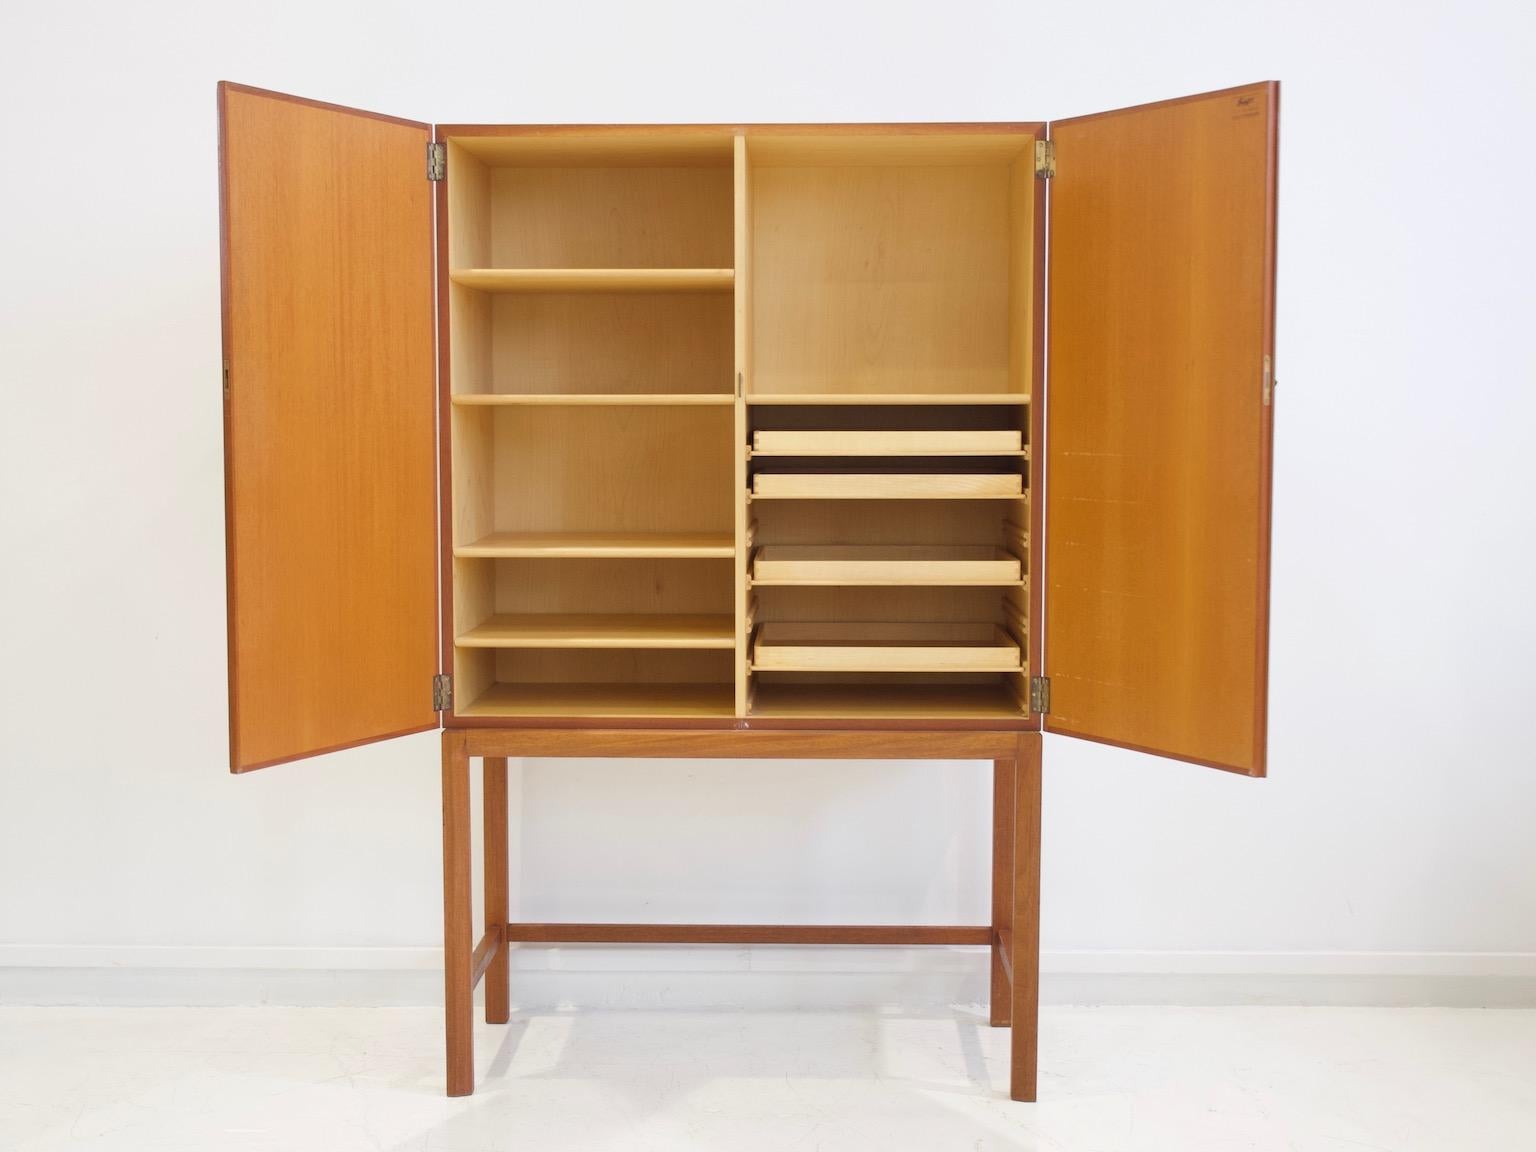 Teak cabinet designed by Axel Larsson (1898-1975) for Bodafors, Sweden in 1961. Interior made of birch. Storage featuring shelves and pull-out trays. Beautiful piece of furniture that can be used as a dining room buffet or in a home office to store